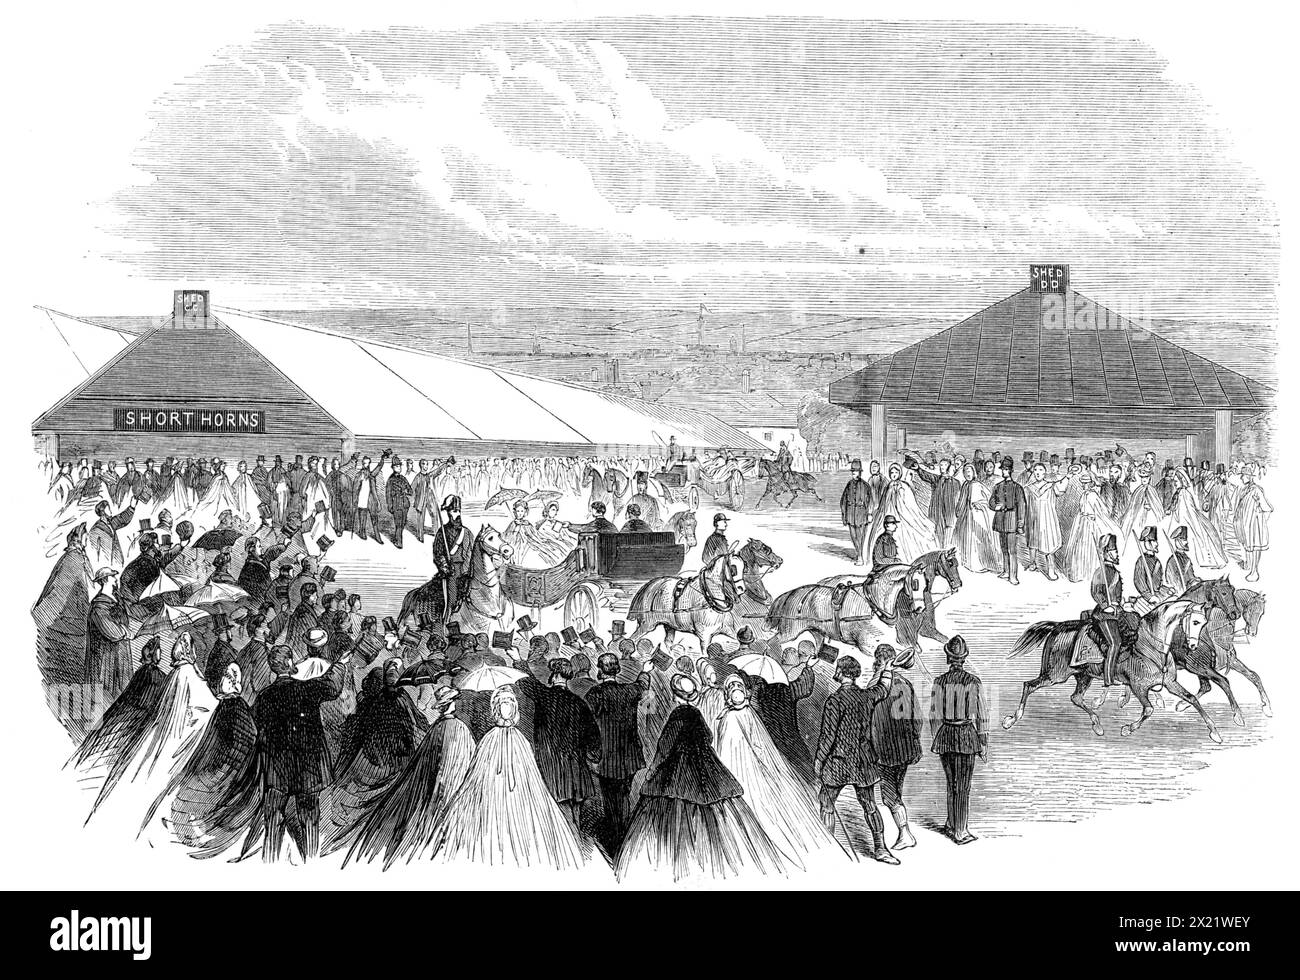 Visit of the Prince and Princess of Wales to Plymouth: their Royal Highnesses in the showyard of the Royal Agricultural Society, 1865. 'On Wednesday forenoon their Royal Highnesses [future King Edward VII and Queen Alexandra] paid a visit to the exhibition of the Agricultural Society at Pennycomequick, a well-known meadow adjoining the town of Devonport... After a short delay at the entrance, the Royal carriage moved forward amid the cheers of the populace...The Prince and Princess confined their attention to the horses and cattle...The thoroughbred horses were first brought out from their box Stock Photo